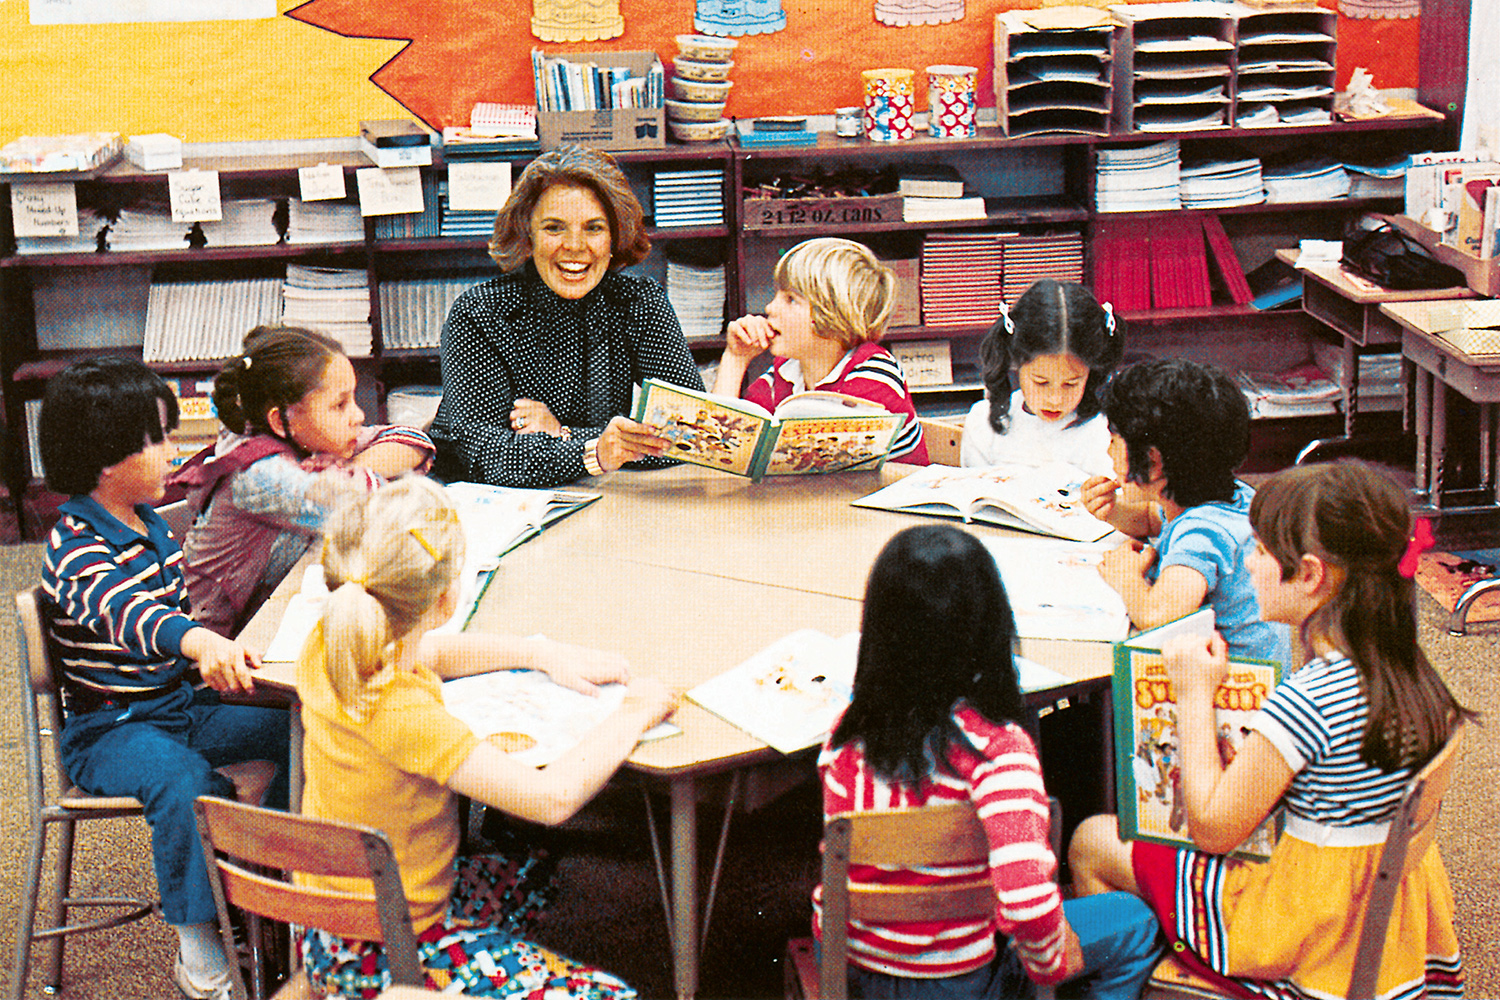 Pleasant Rowland smiles delightedly as a diverse group of young children gathered at a classroom table read from the textbook she created.